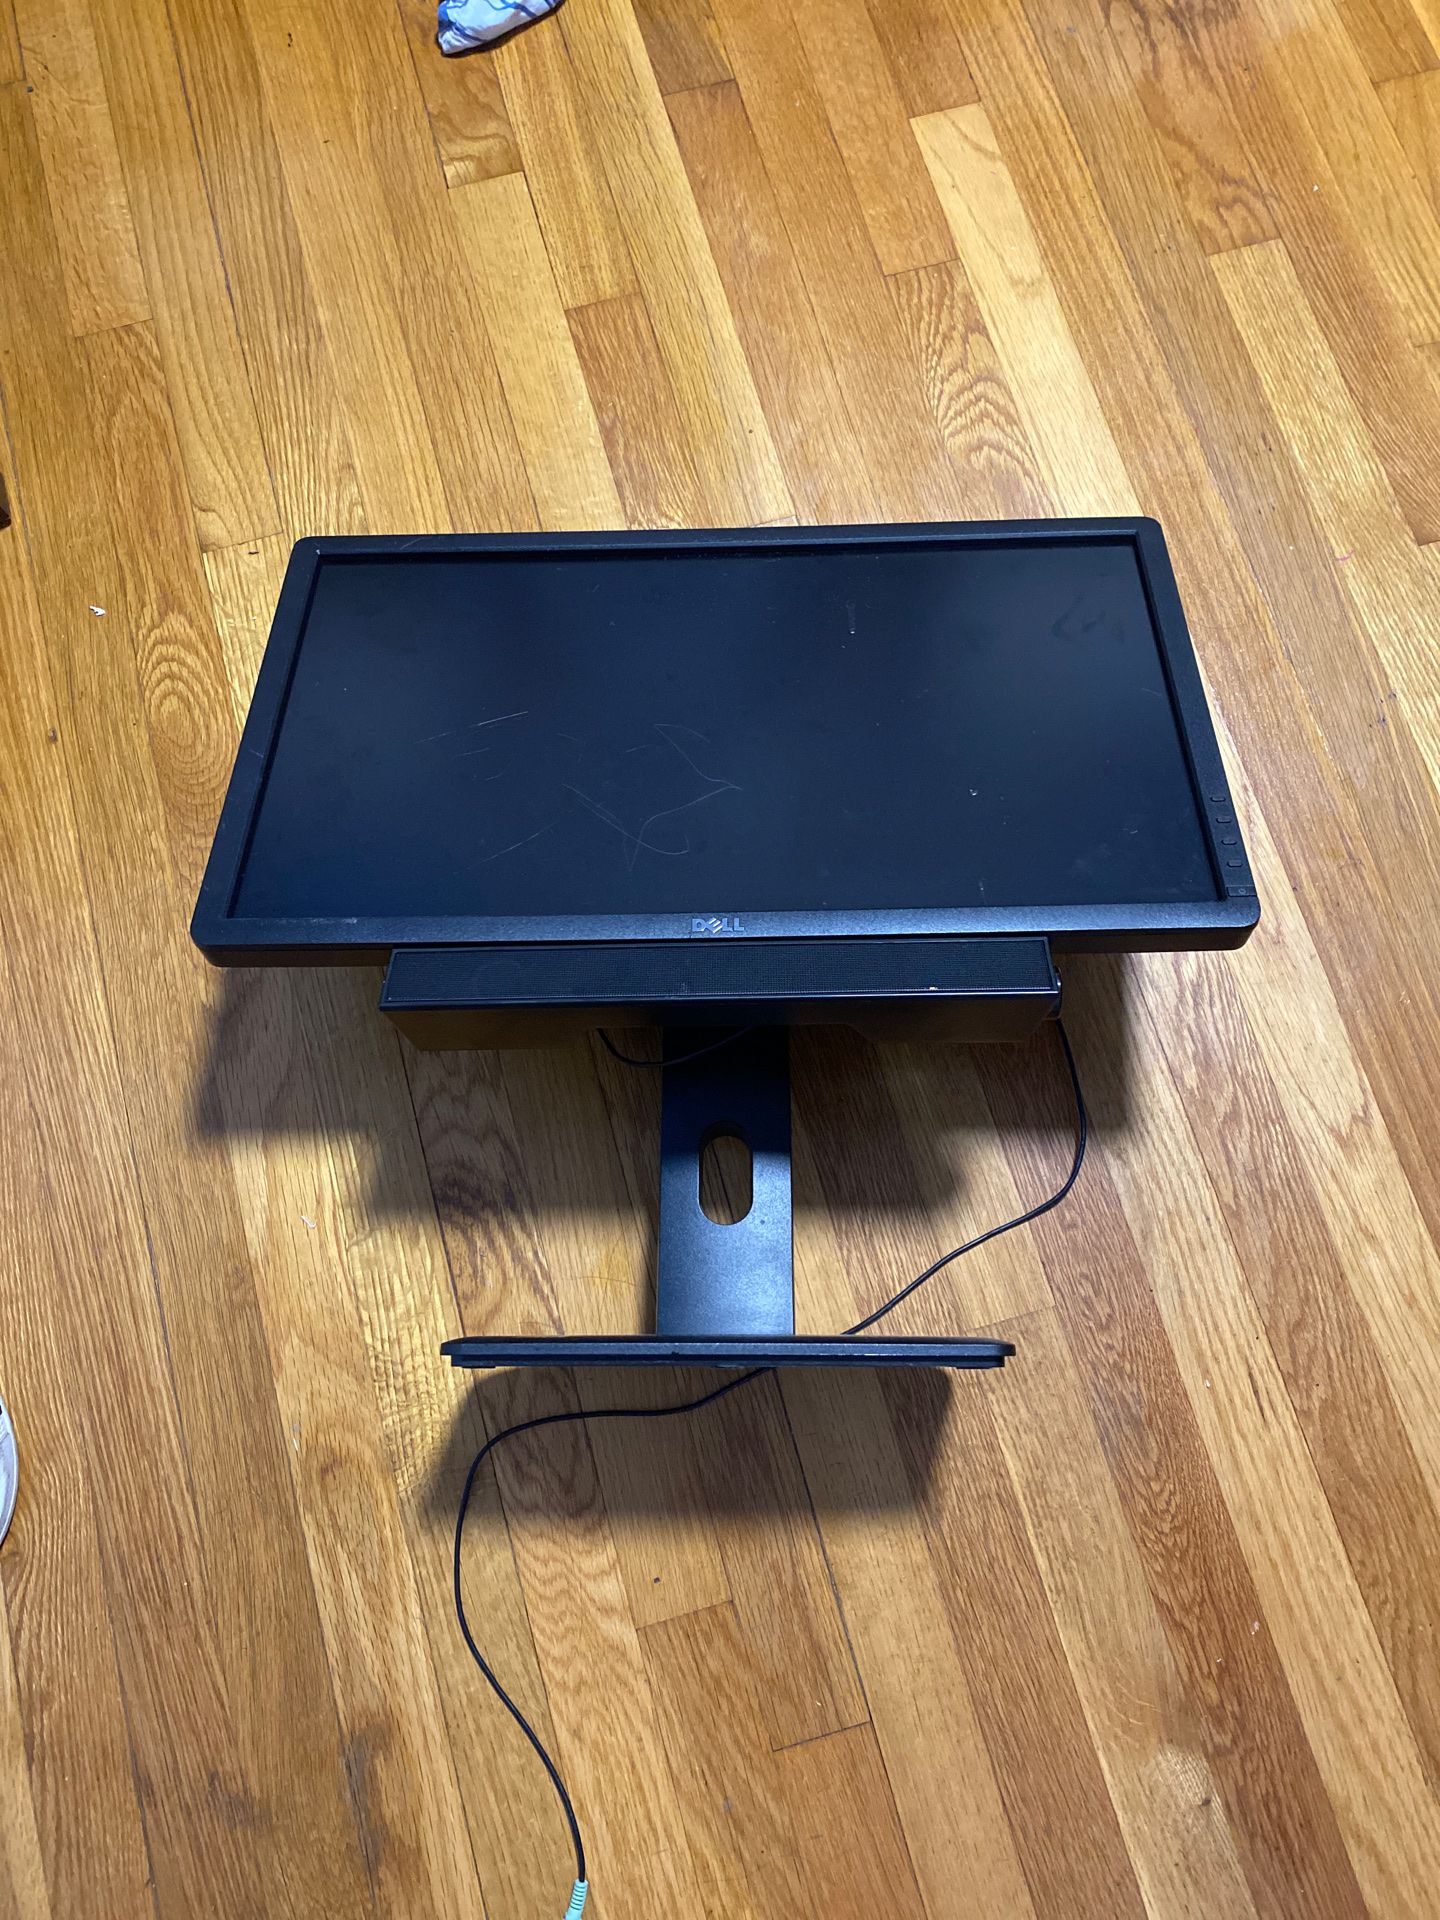 Dell monitor used